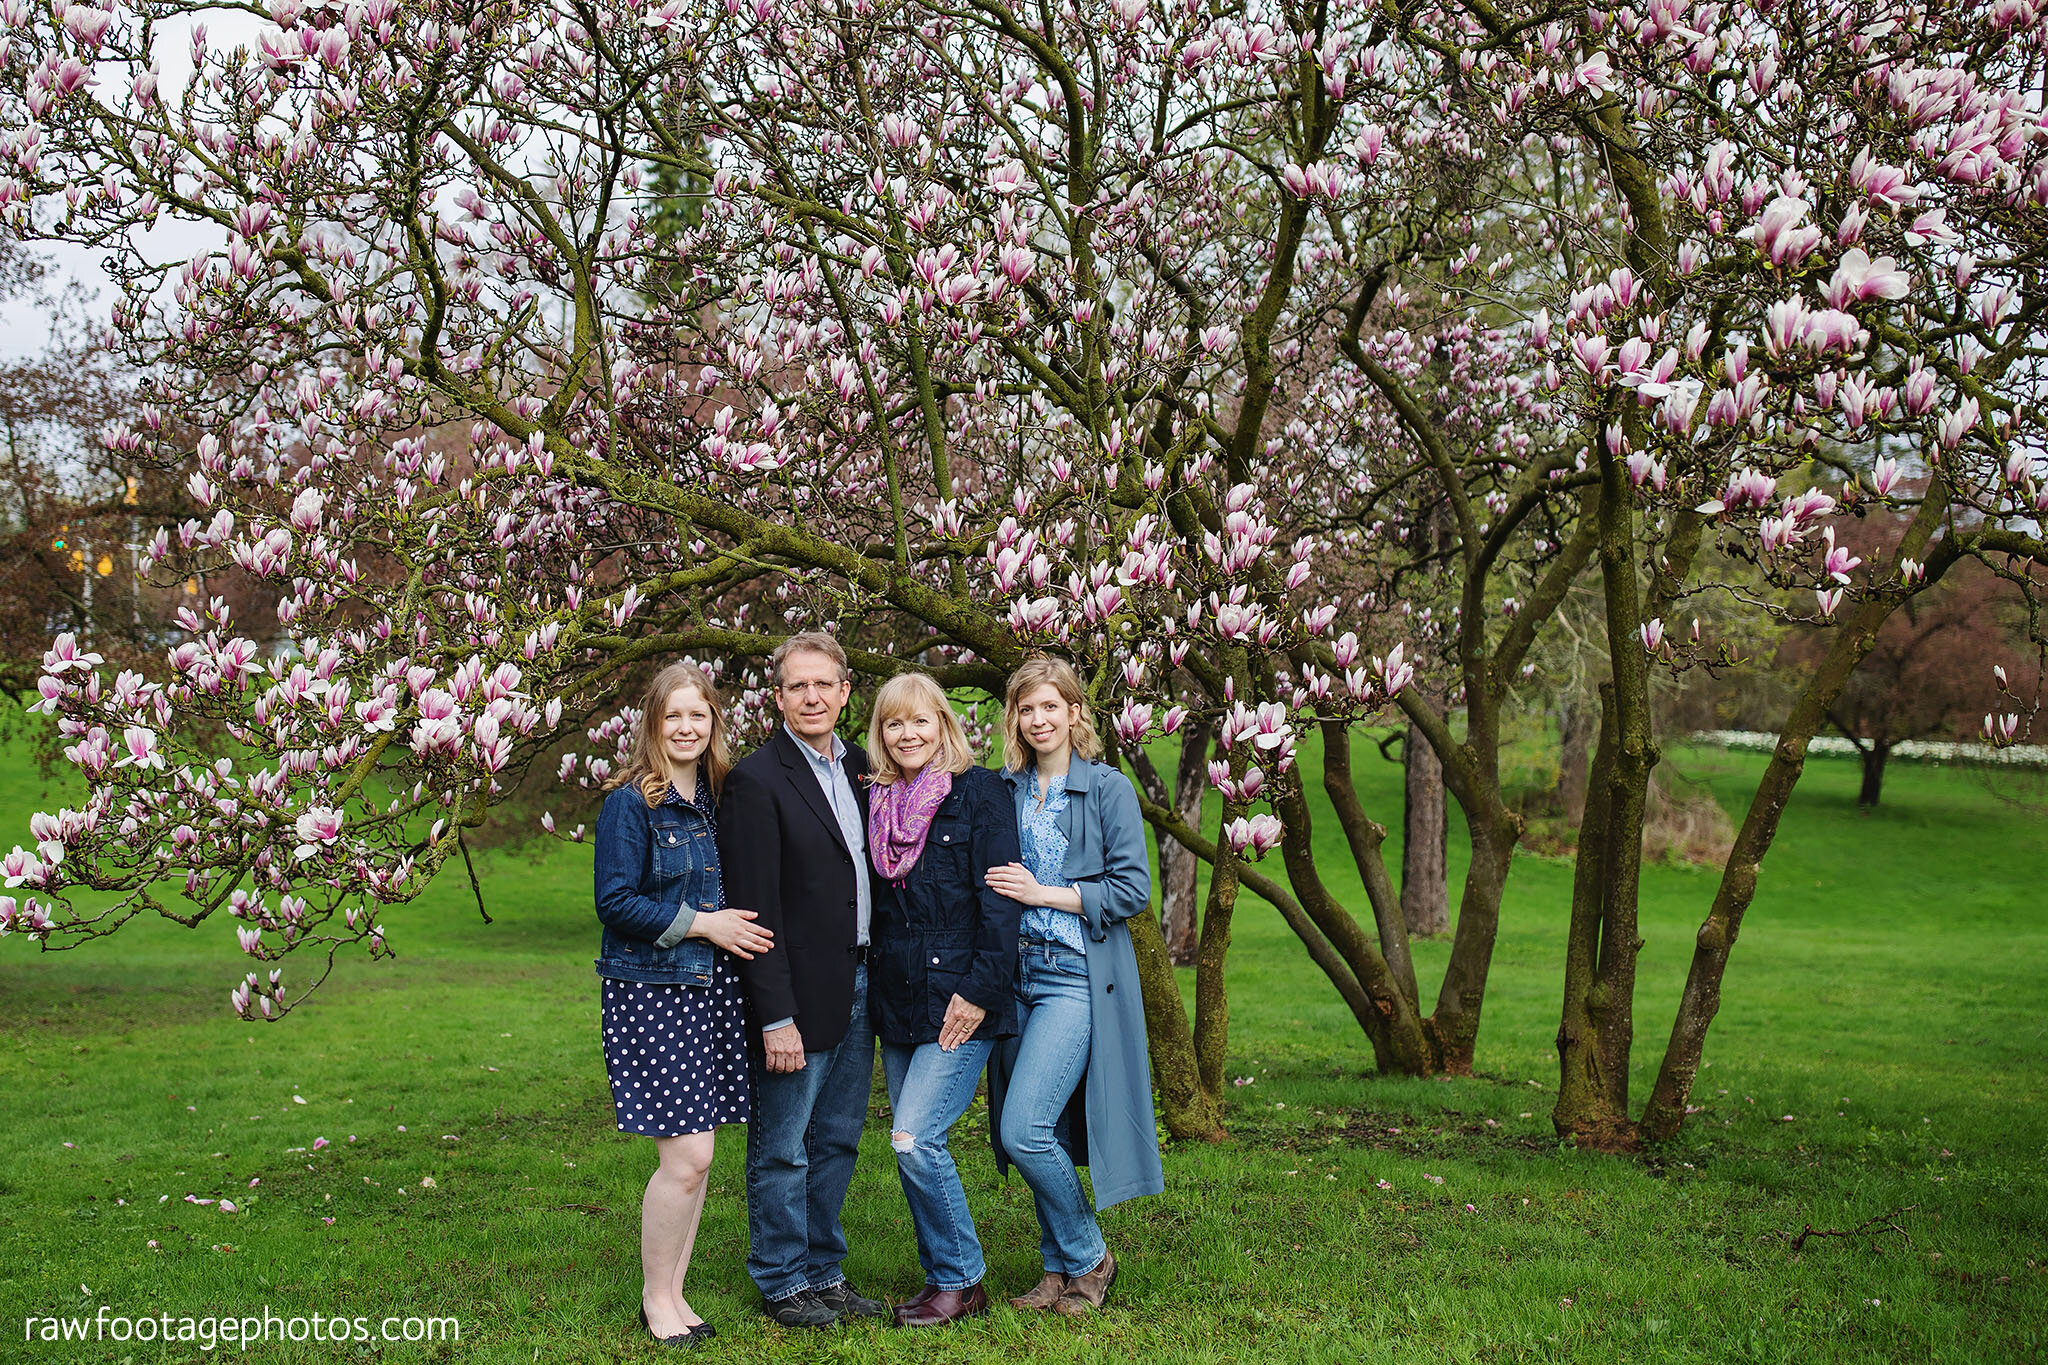 london_ontario_family_photographer-raw_footage_photography-spring_blossoms-extended_family_session-magnolia-blossoms_012.jpg